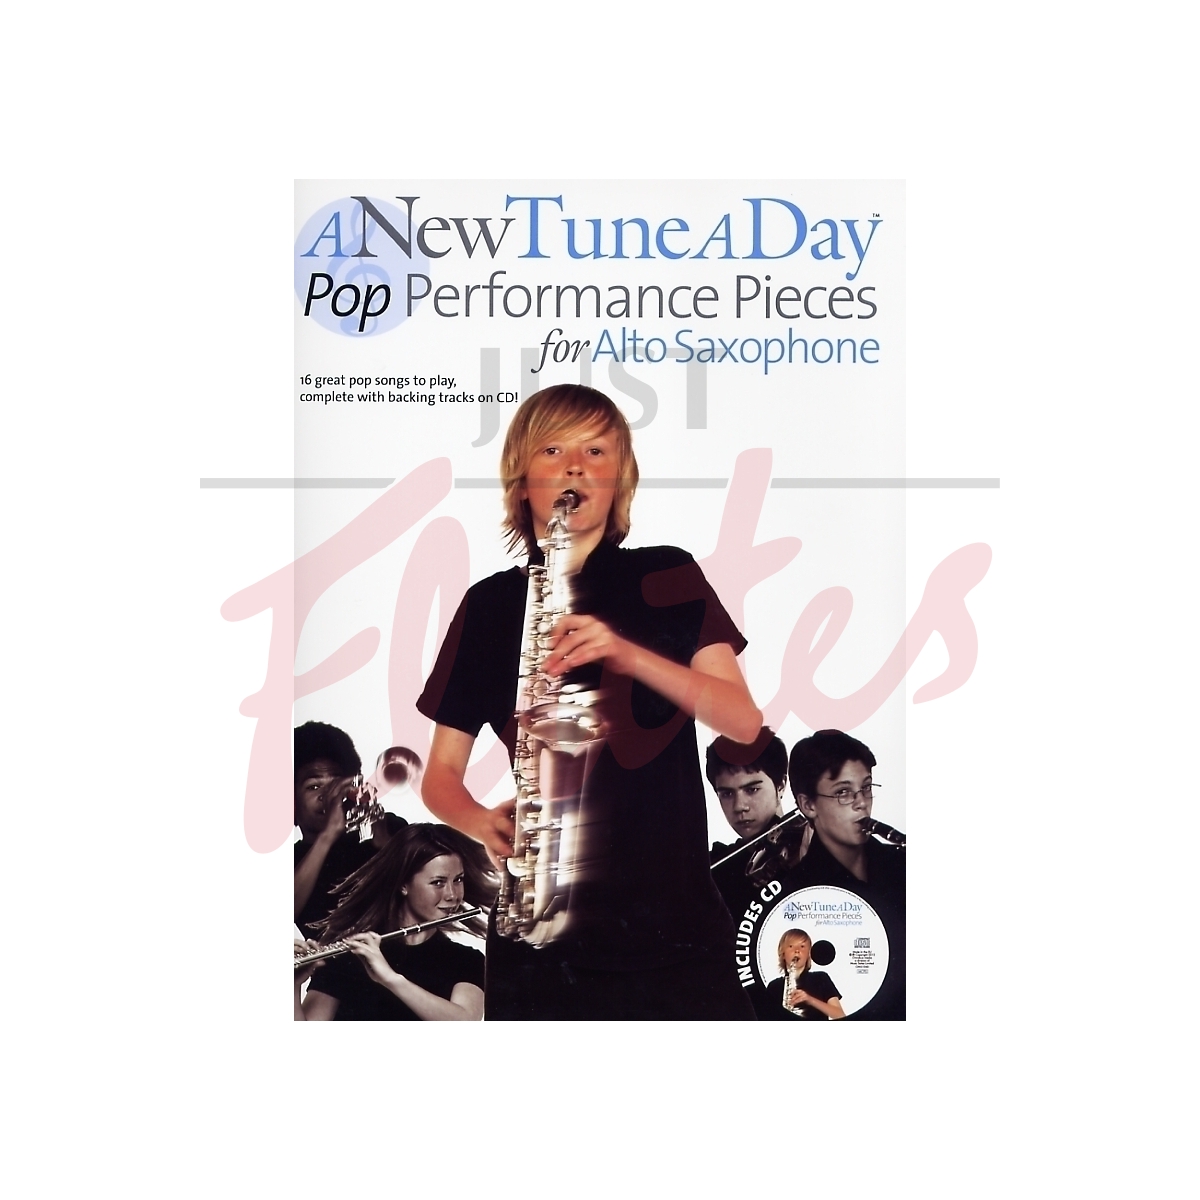 A New Tune A Day for Alto Saxophone: Pop Performance Pieces